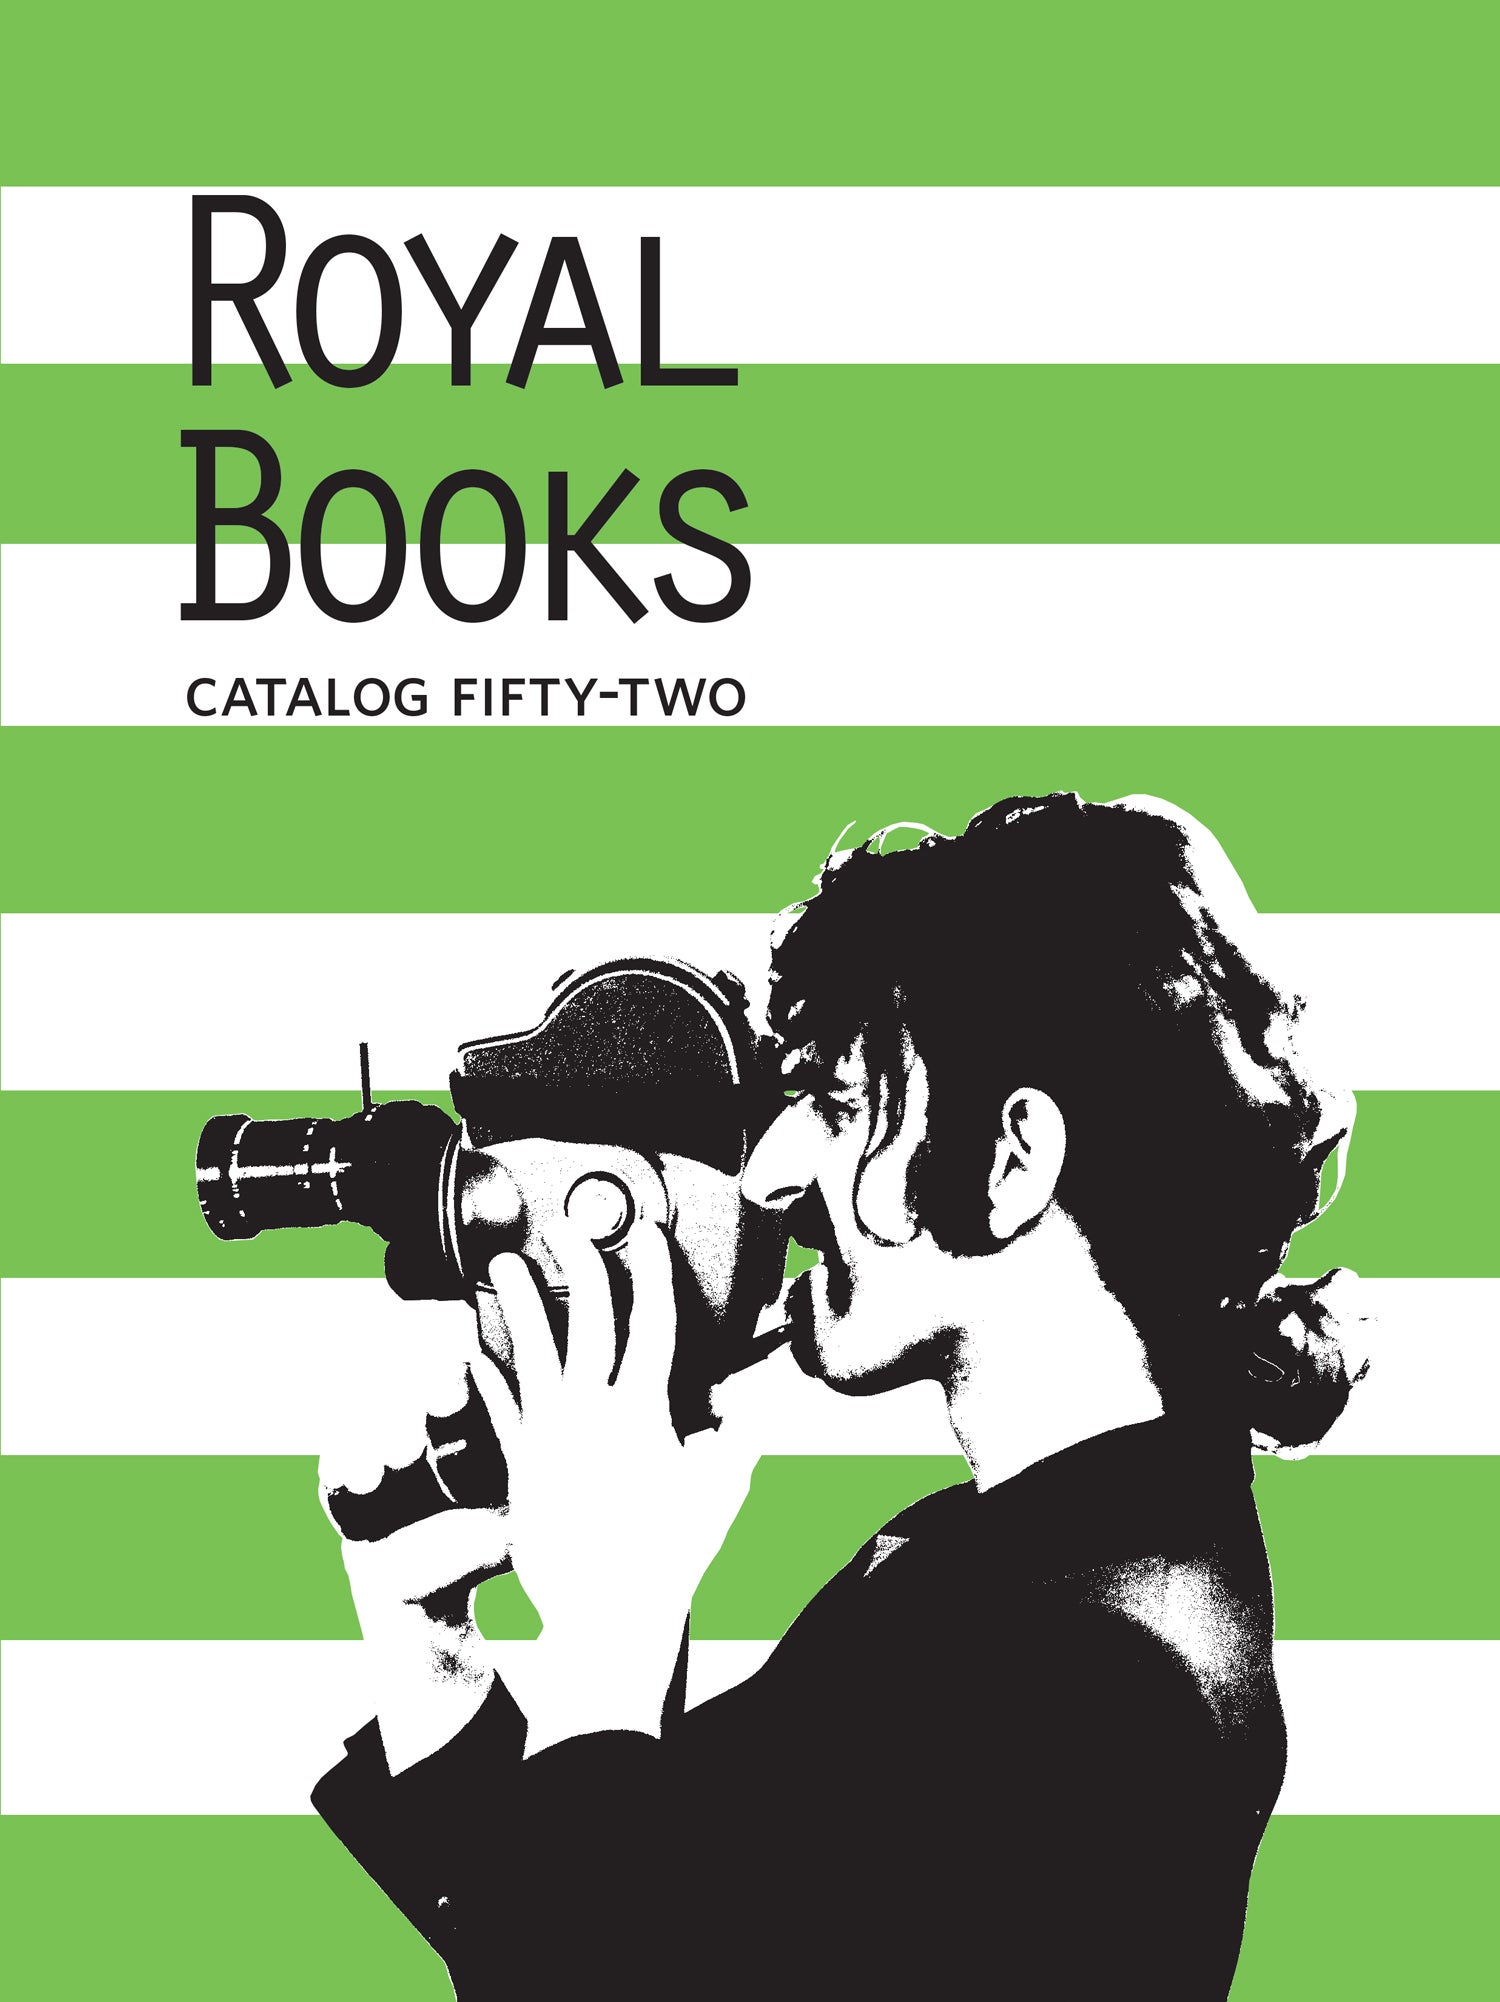 Catalog Fifty-Two